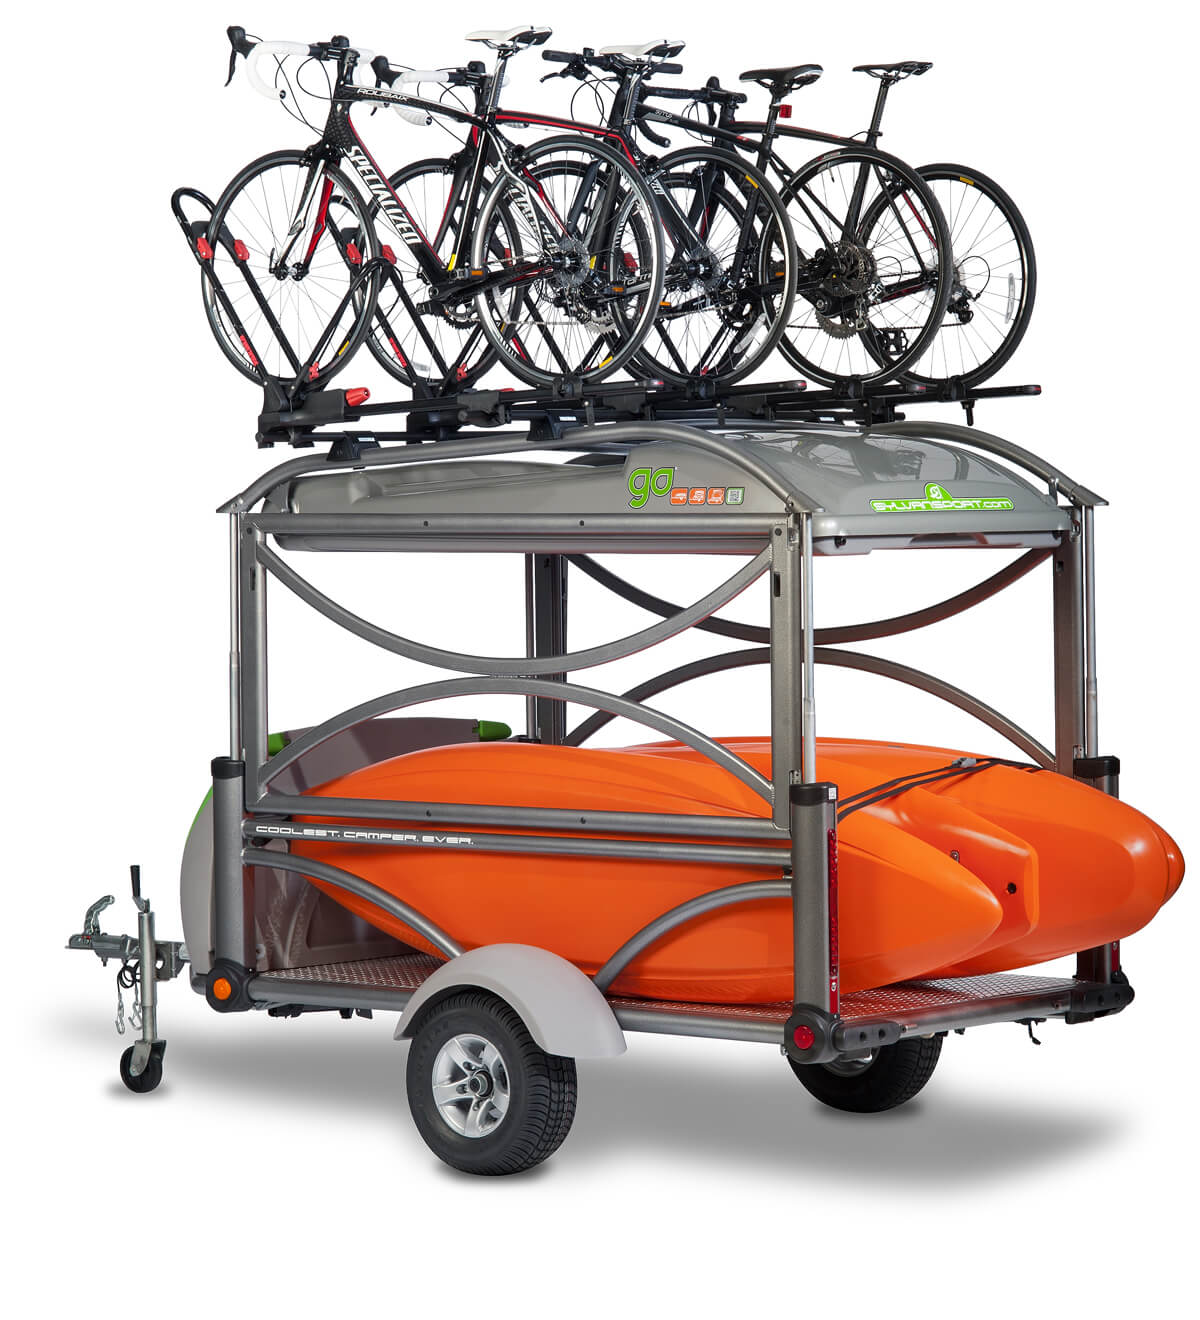 Trailer with Kayaks and Bikes